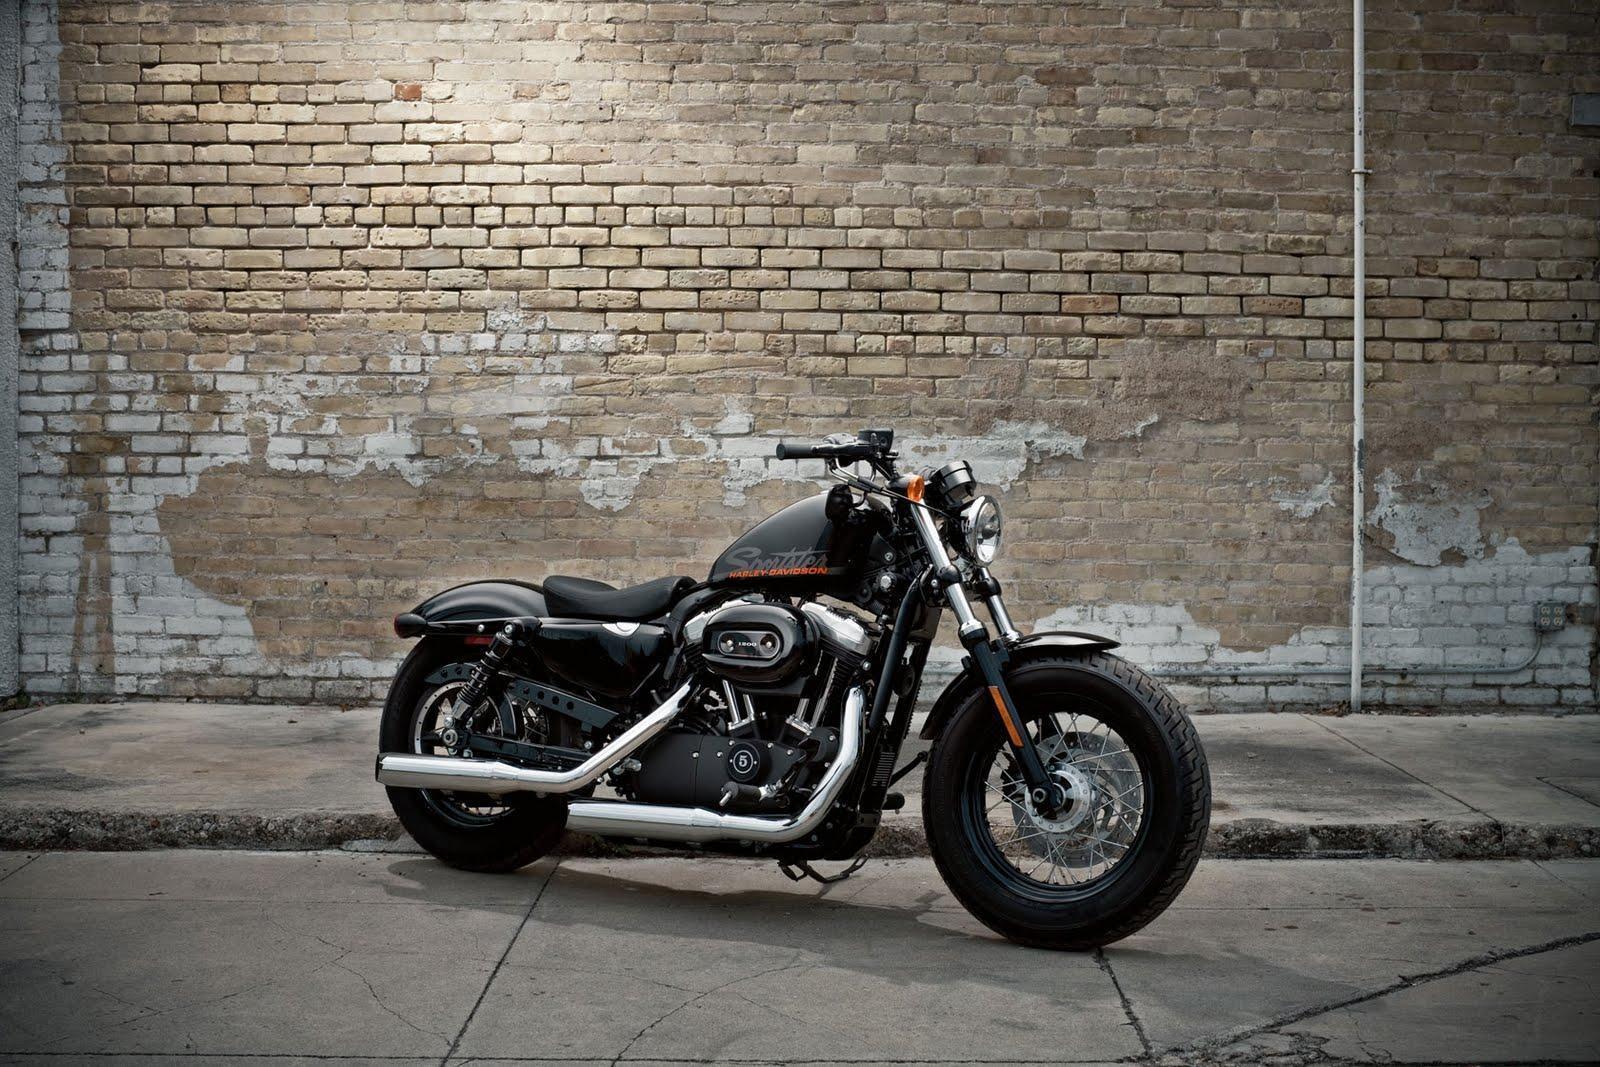 Wallpapers For > Harley Davidson Bikes Wallpapers Hd 2012